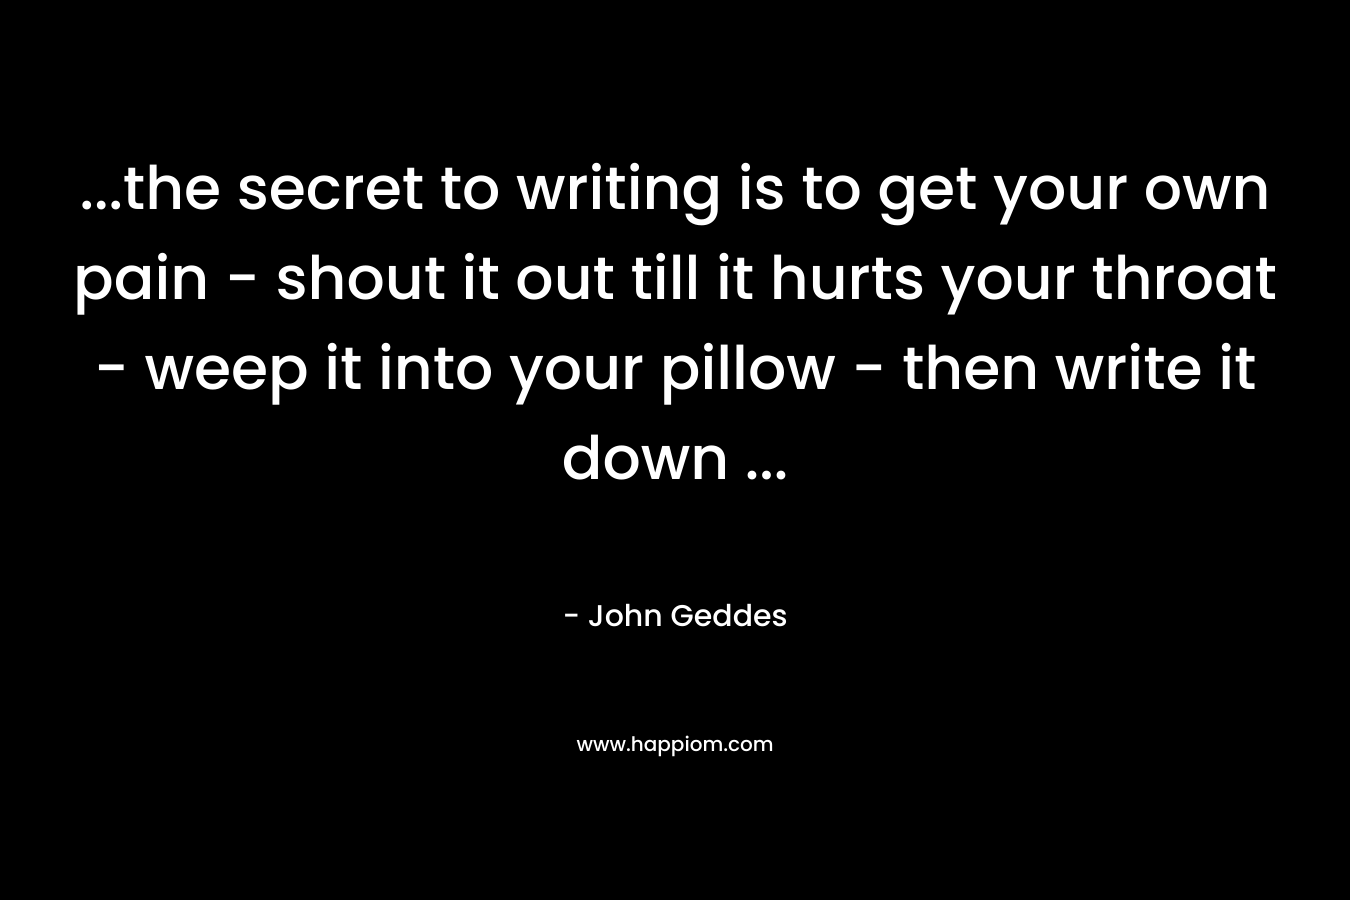 …the secret to writing is to get your own pain – shout it out till it hurts your throat – weep it into your pillow – then write it down … – John Geddes